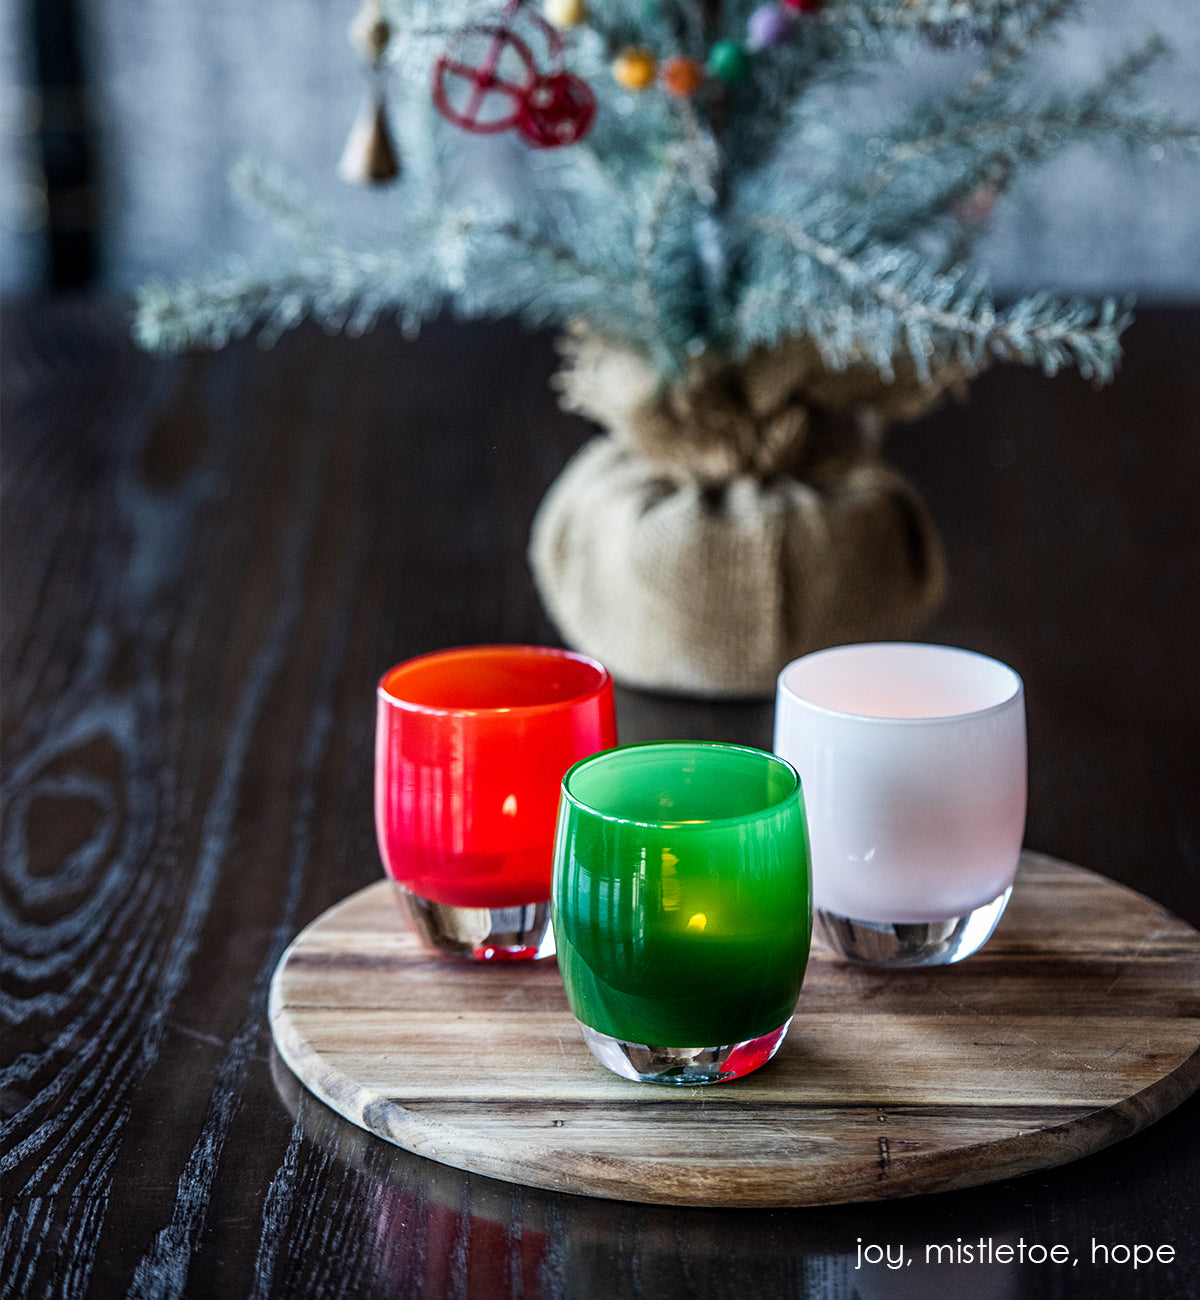 mistletoe green hand-blown glass votive candle holder. Paired with joy and hope.